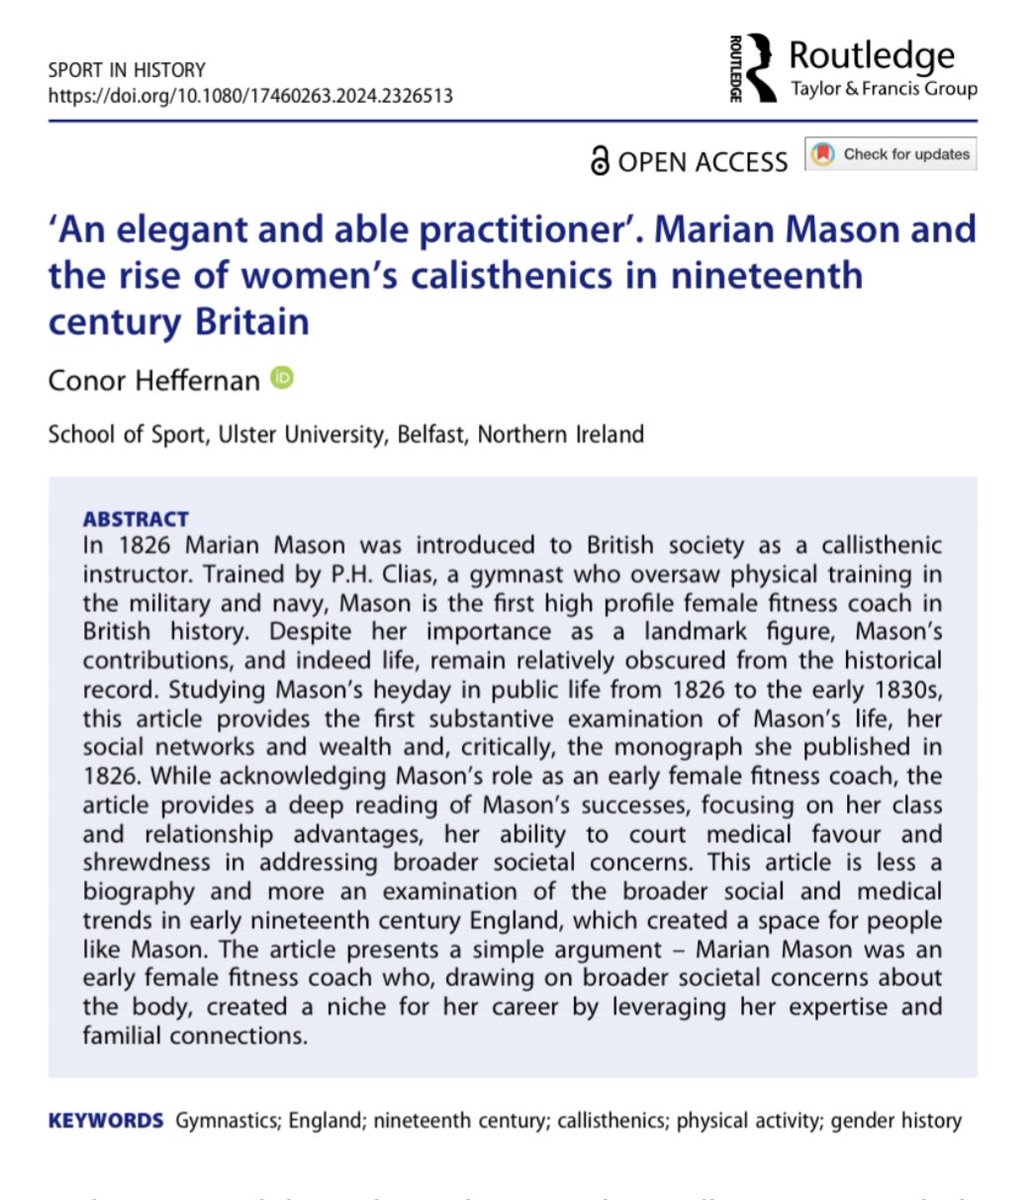 🚨 NEW PUBLICATION 🚨 Congratulations Dr @PhysCstudy on your recent paper in @SprtinHistory exploring England's first female personal trainer, Marian Mason. #gymnastics #calisthenics #gender #history #physicalactivity A great read which is open access 👉 tandfonline.com/doi/full/10.10…